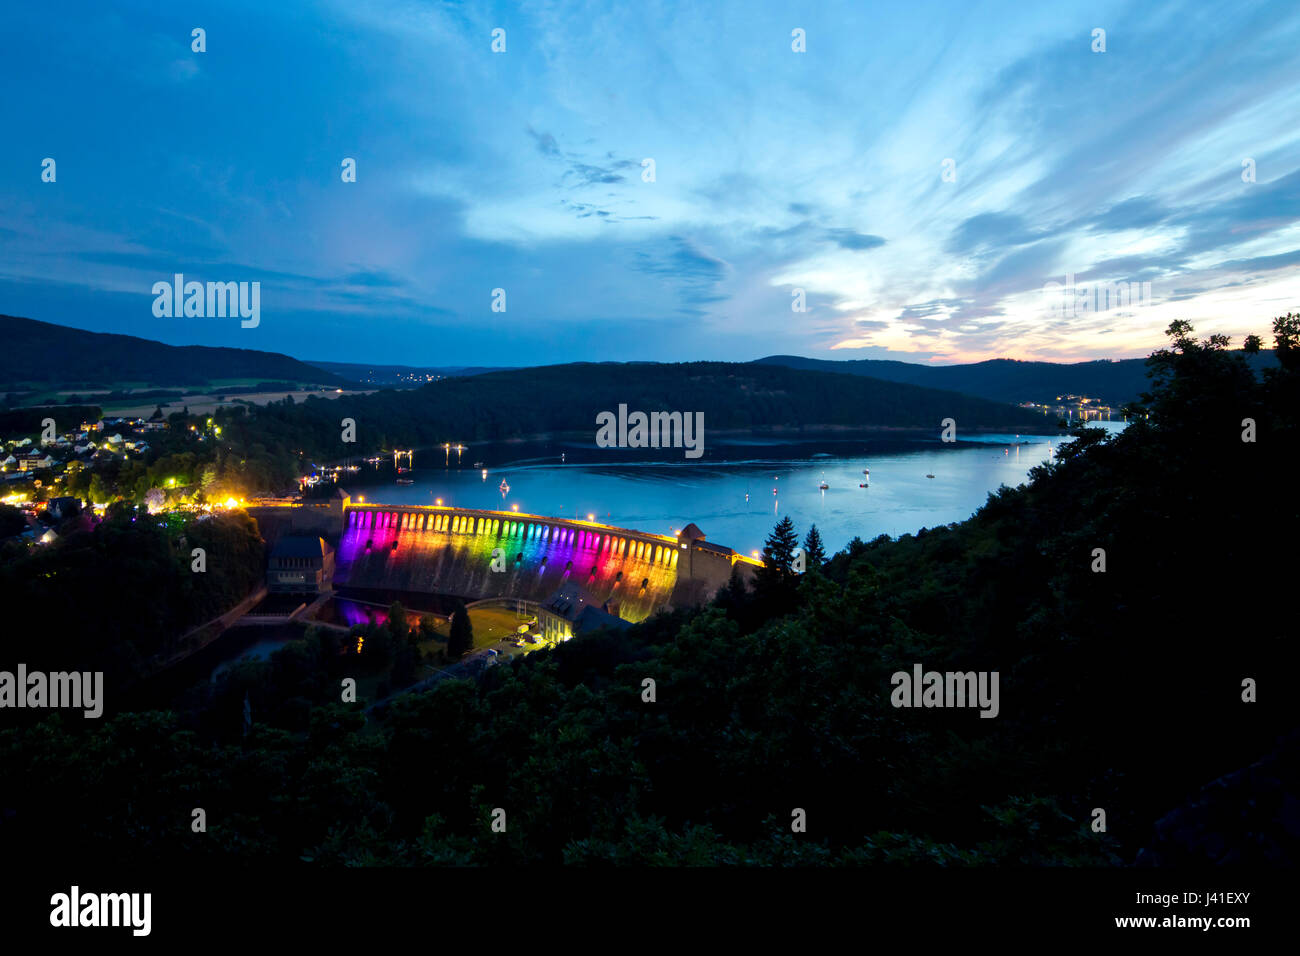 Edertalsperre dam at Lake Edersee in Kellerwald-Edersee National Park illuminated by a colorful light installation at dusk, Lake Edersee, Hesse, Germany, Europe Stock Photo